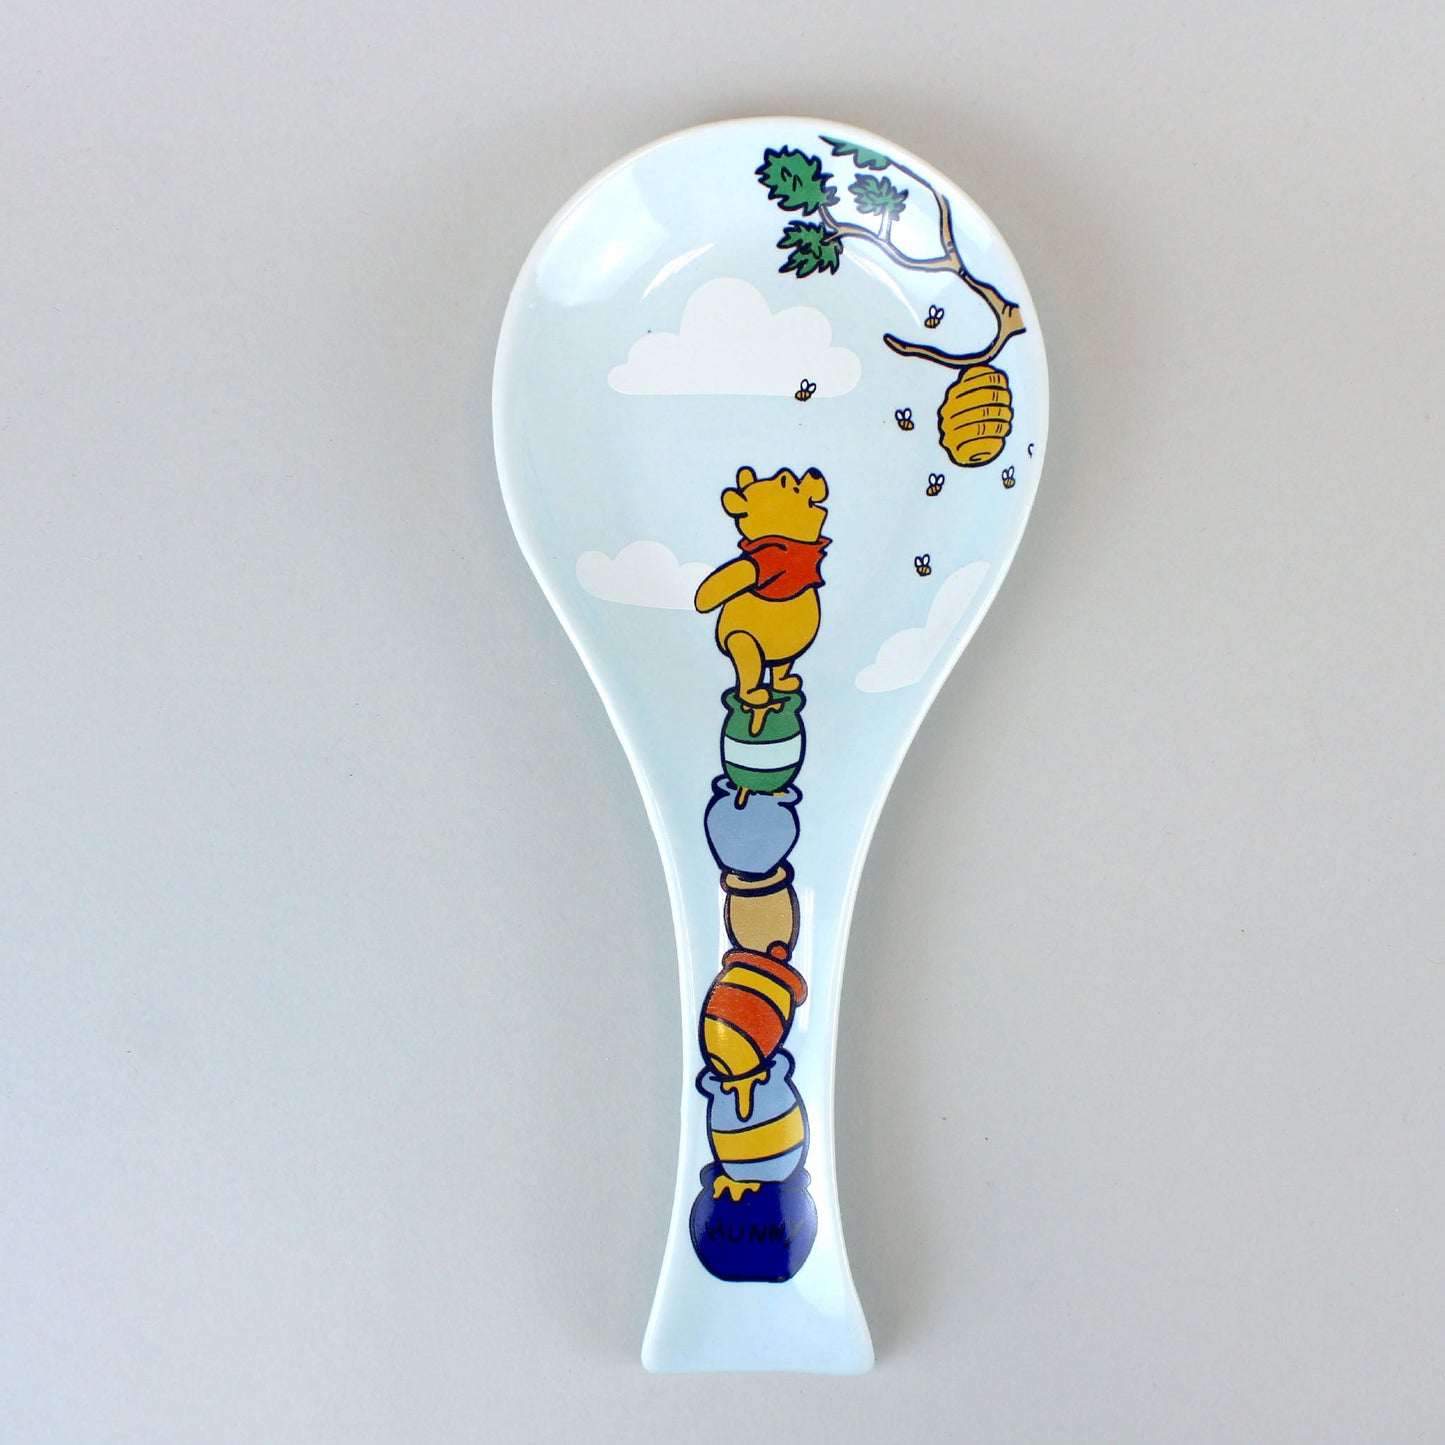 Load image into Gallery viewer, Honey Pots (Winnie the Pooh) Ceramic Spoon Rest
